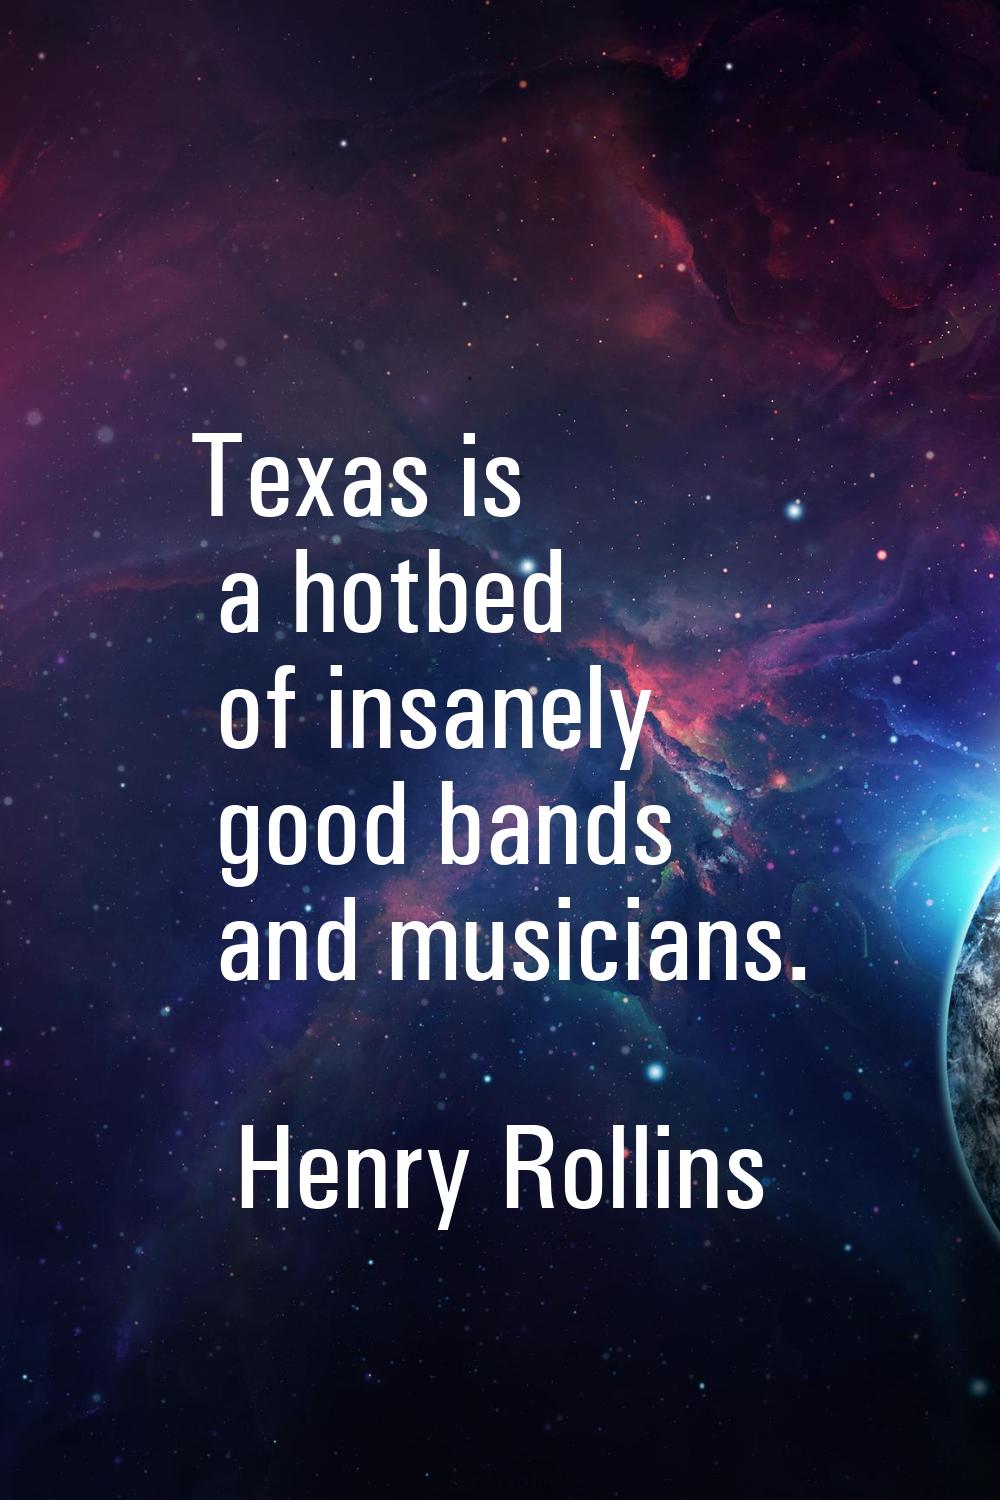 Texas is a hotbed of insanely good bands and musicians.